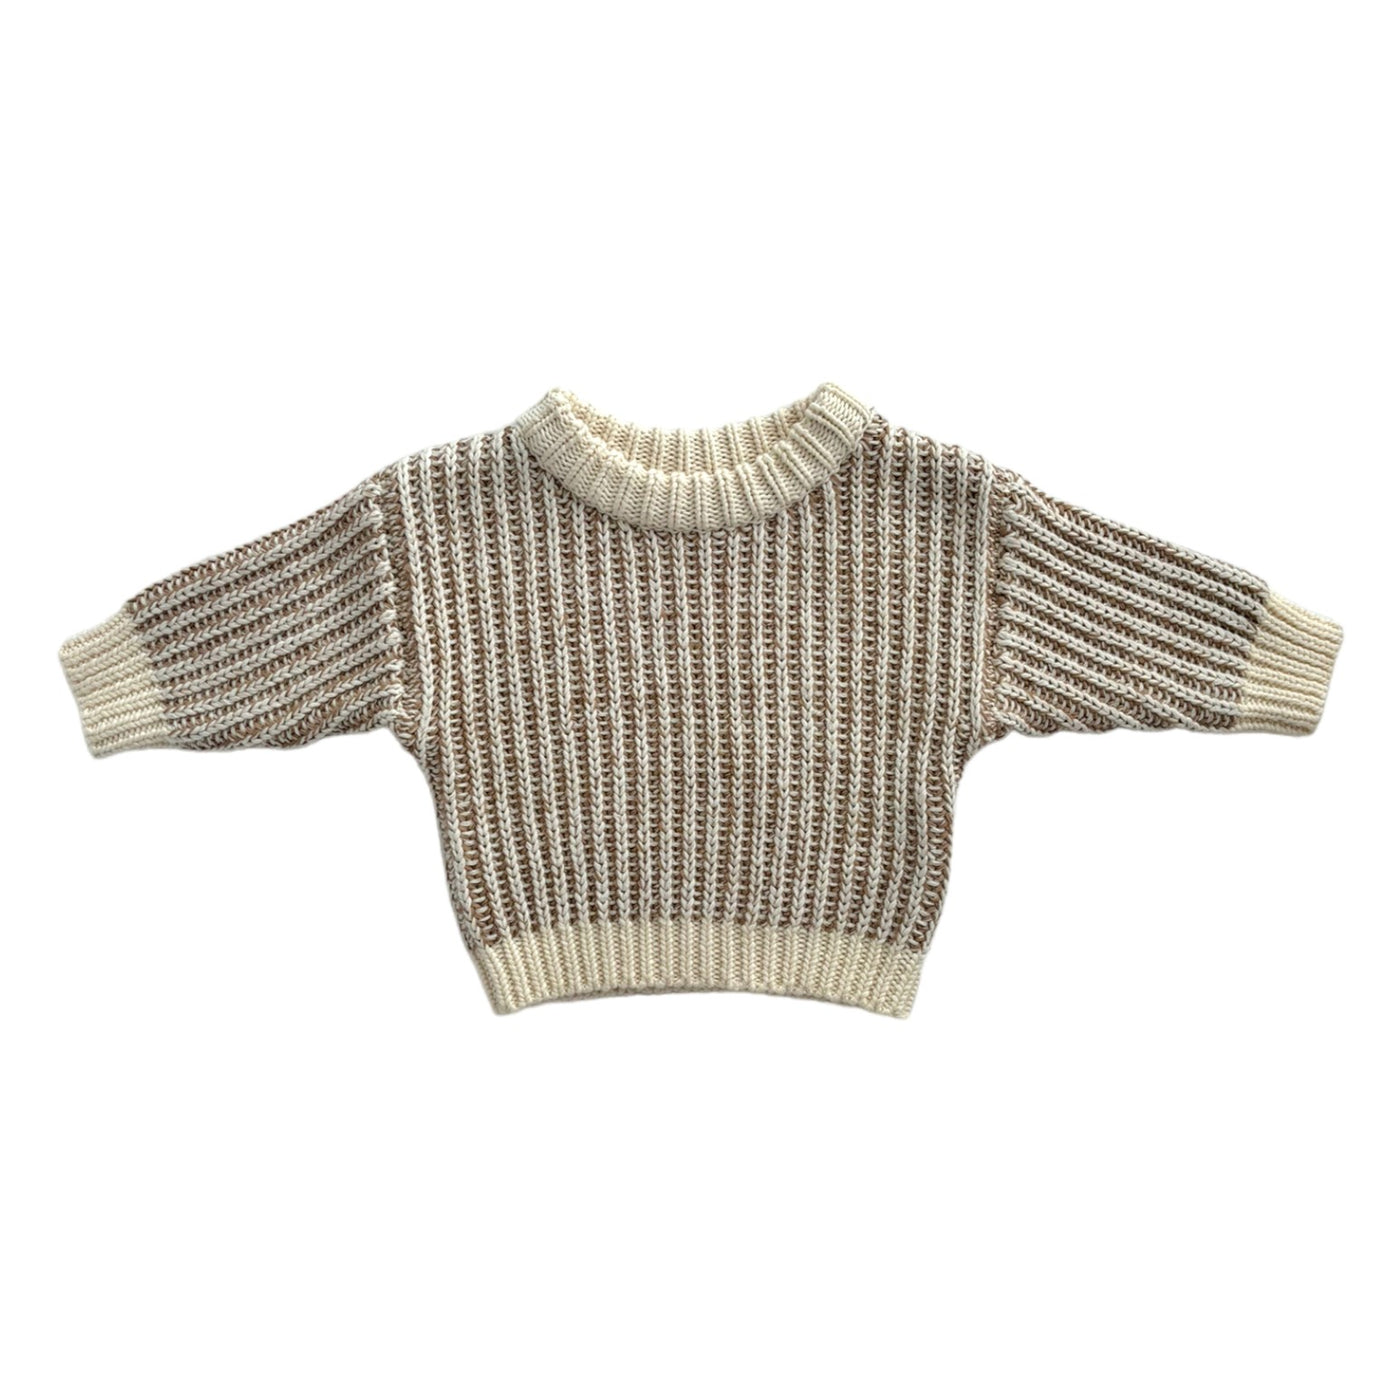 【BELLE&SUN】【30%OFF】Knit Sweater Pebble セーター 12-18m,18-24m,2-3y  | Coucoubebe/ククベベ